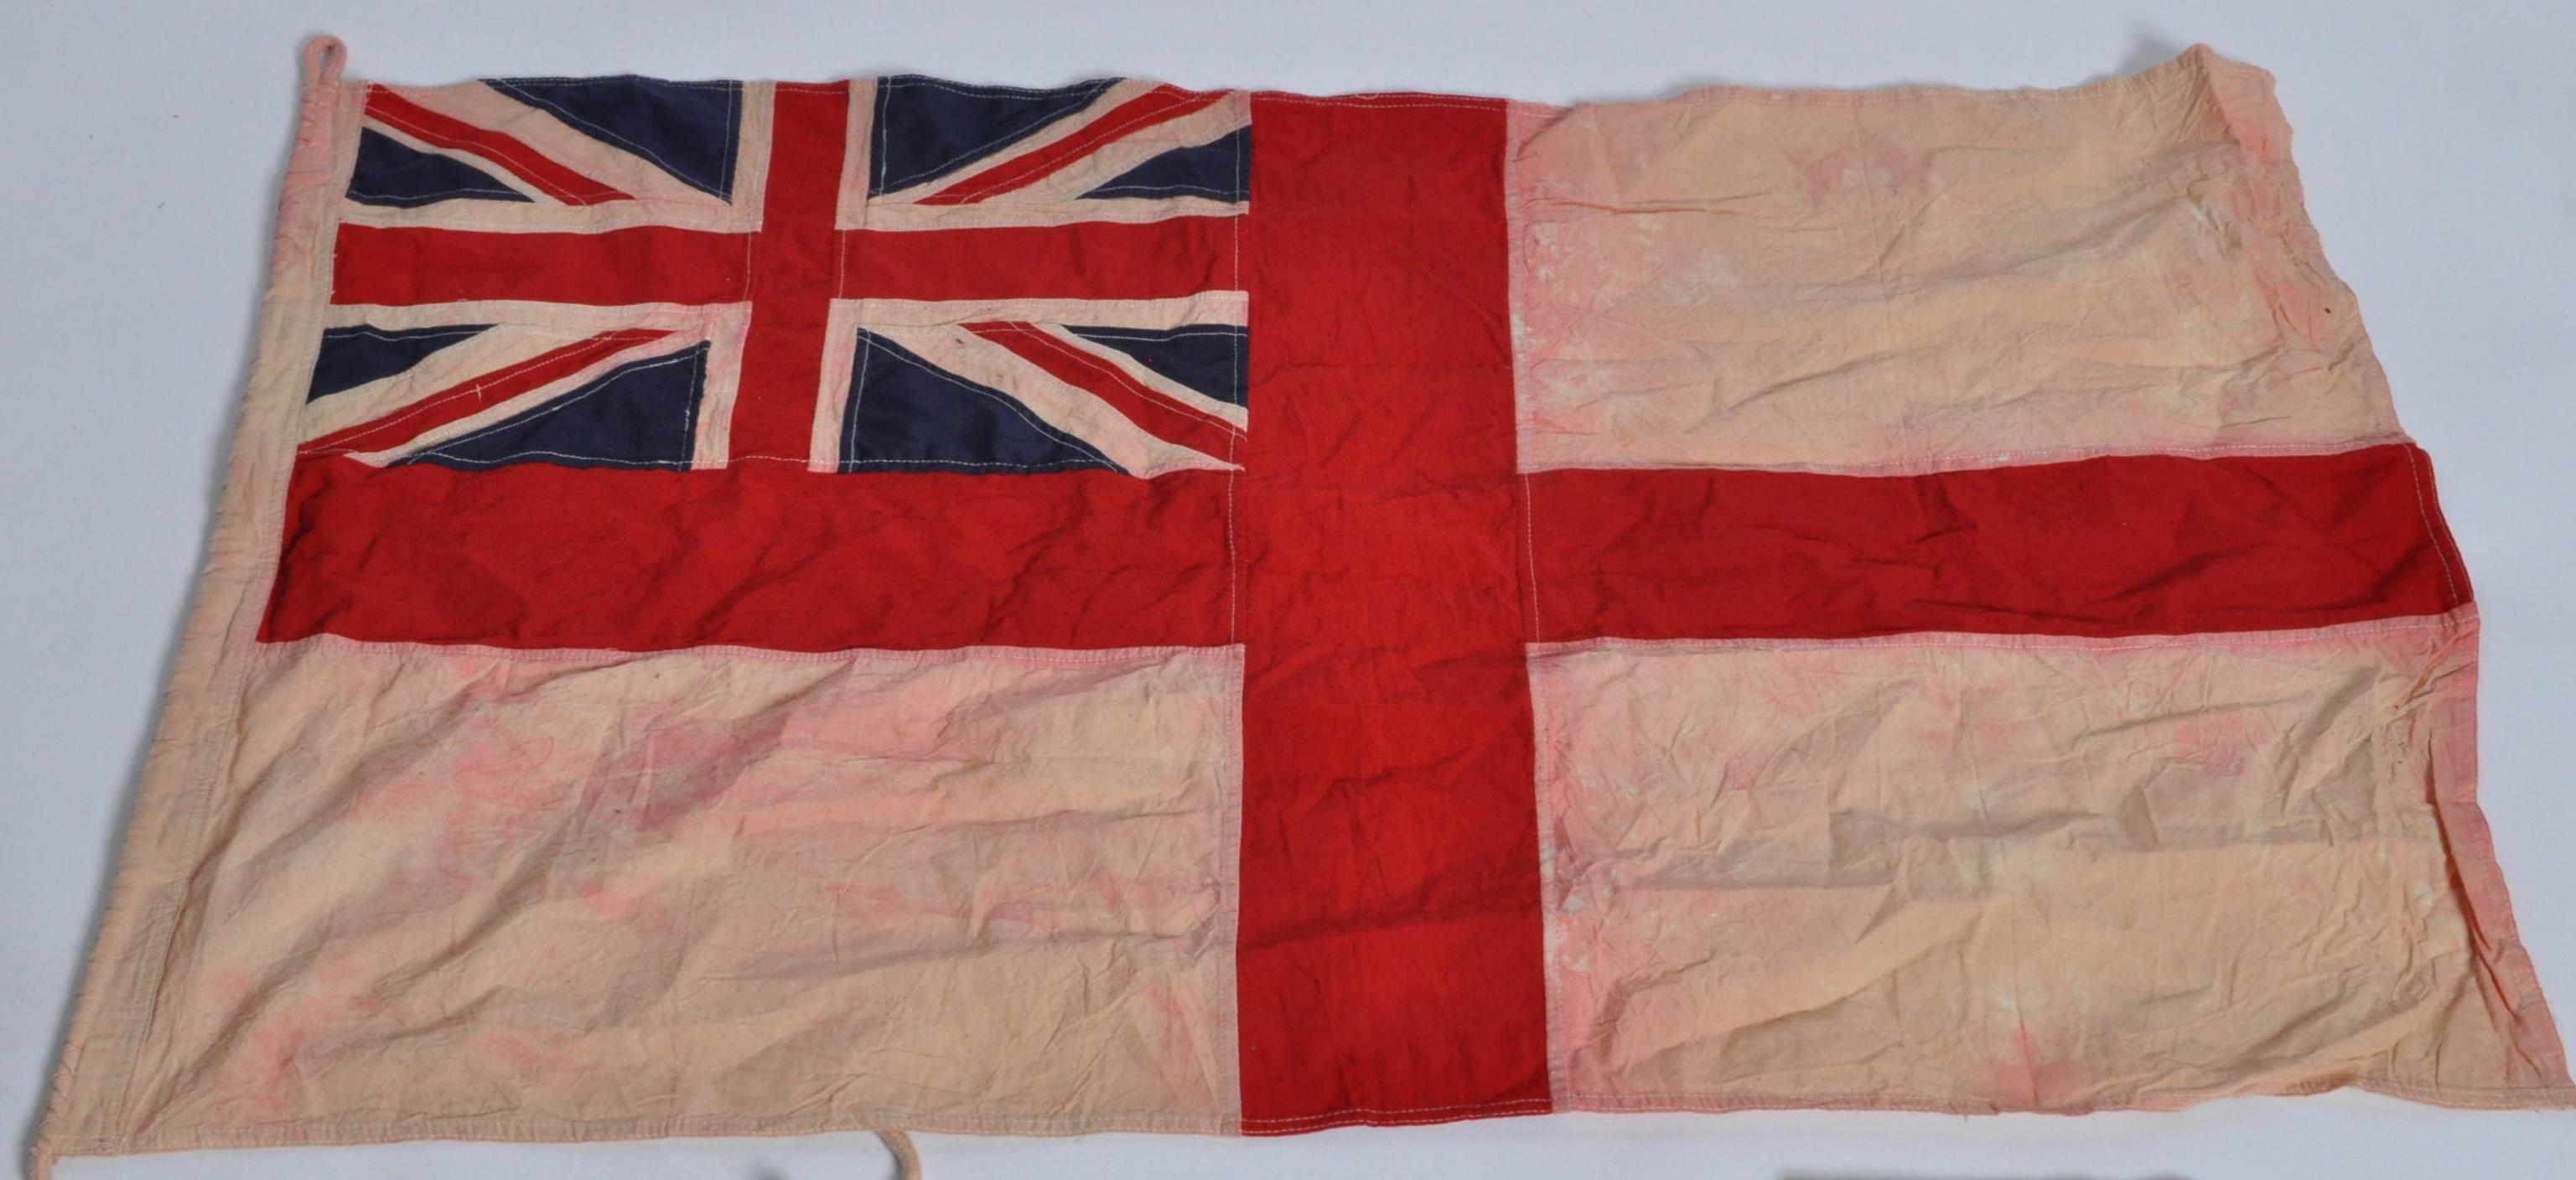 WWII INTEREST - HMS RAINBOW RELATED ITEMS - FLAG & CARD - Image 3 of 4